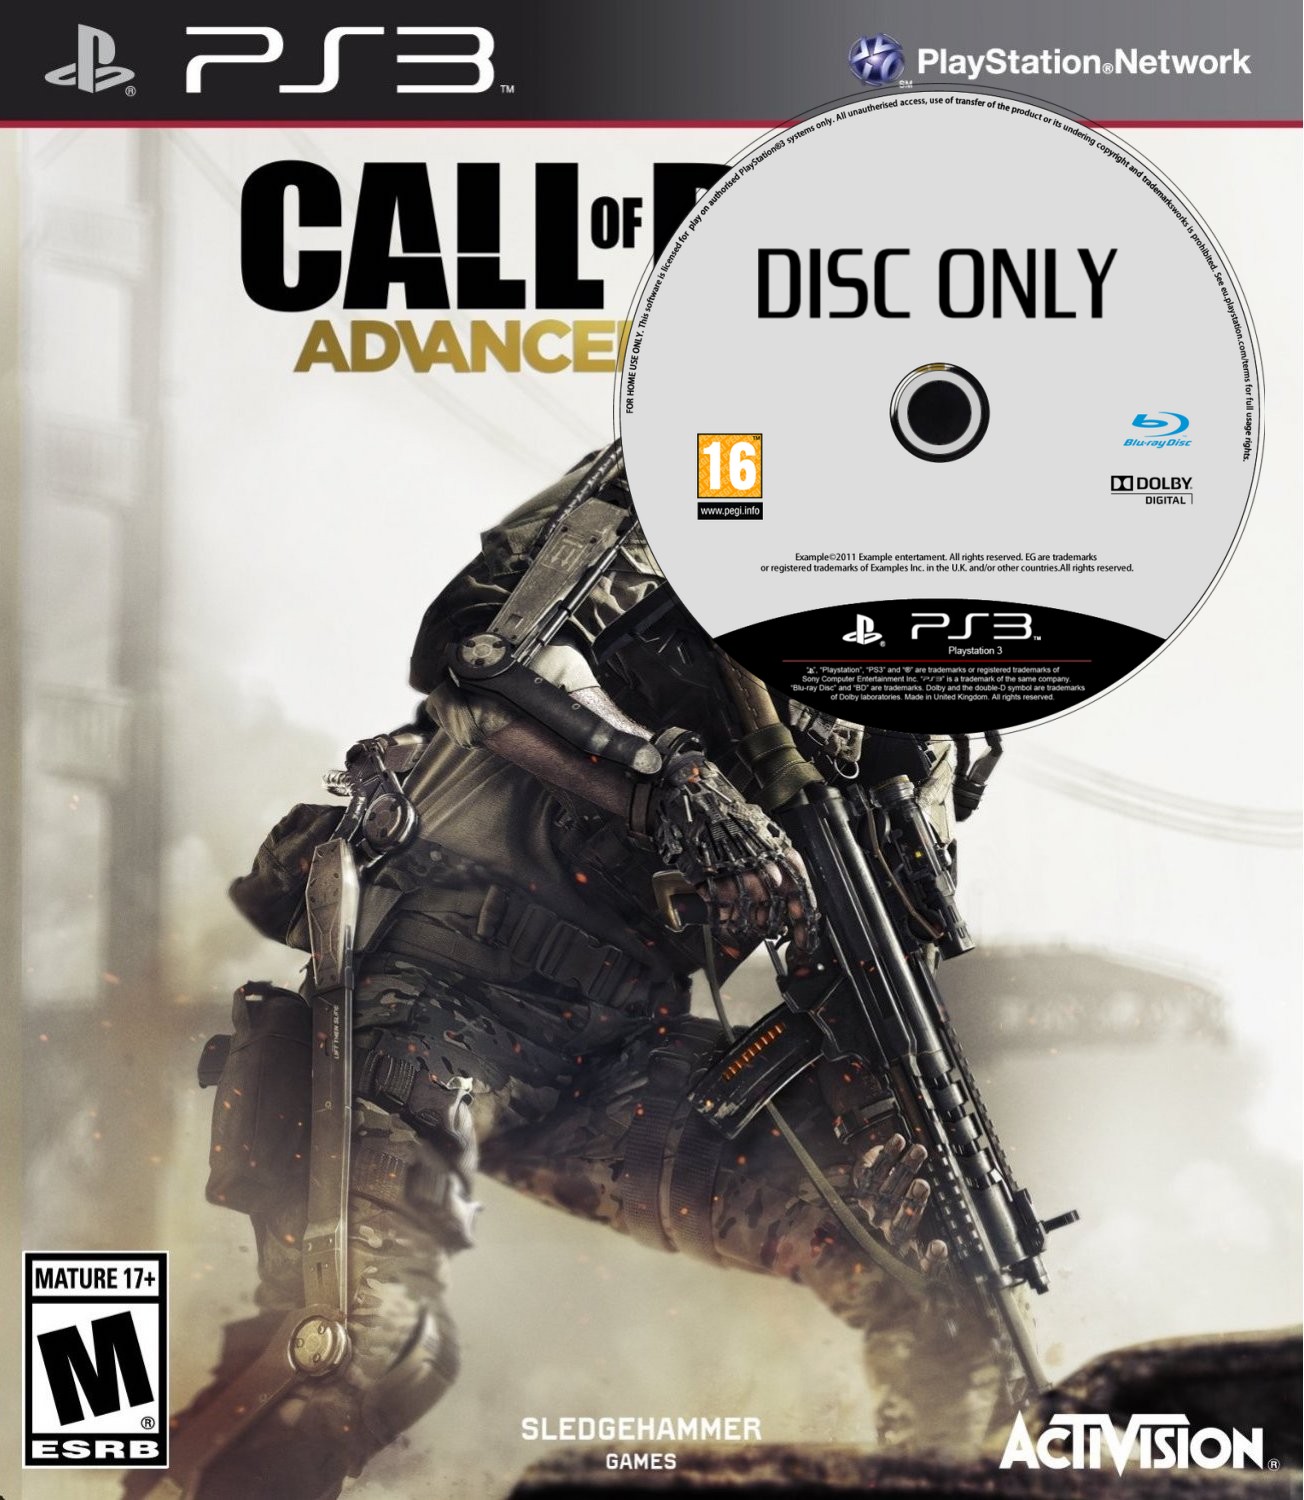 Call of Duty: Advanced Warfare - Disc Only Kopen | Playstation 3 Games